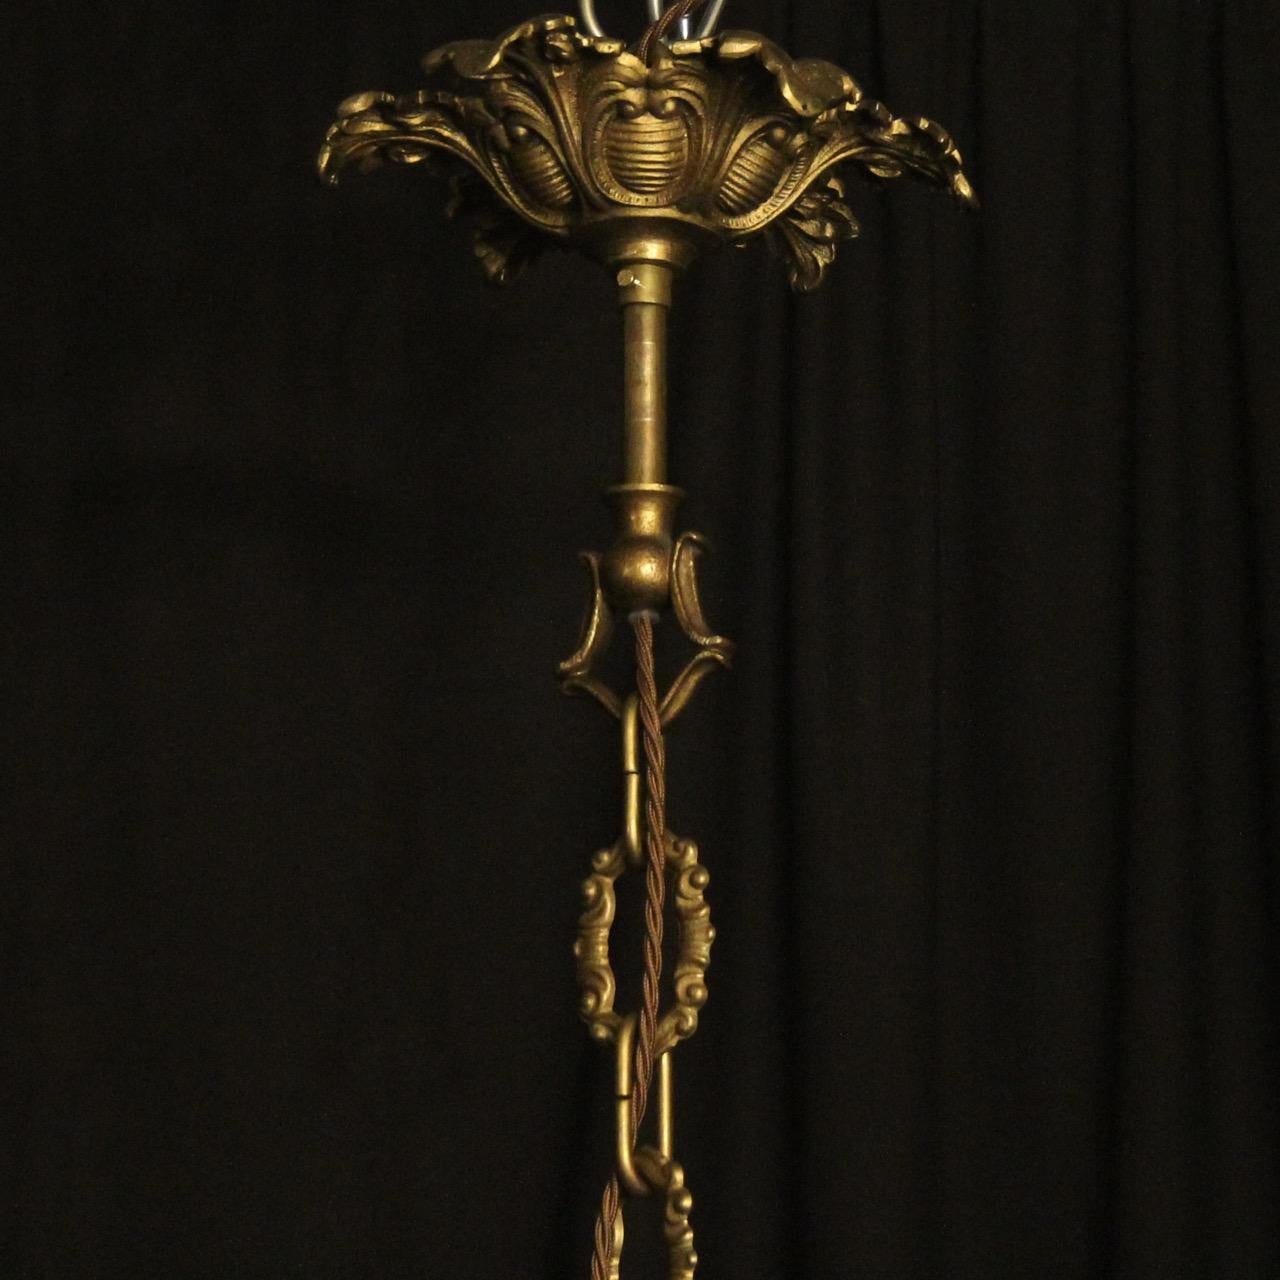 French Mid-19th Century F. Barbedienne Antique Bronze Chandelier For Sale 6